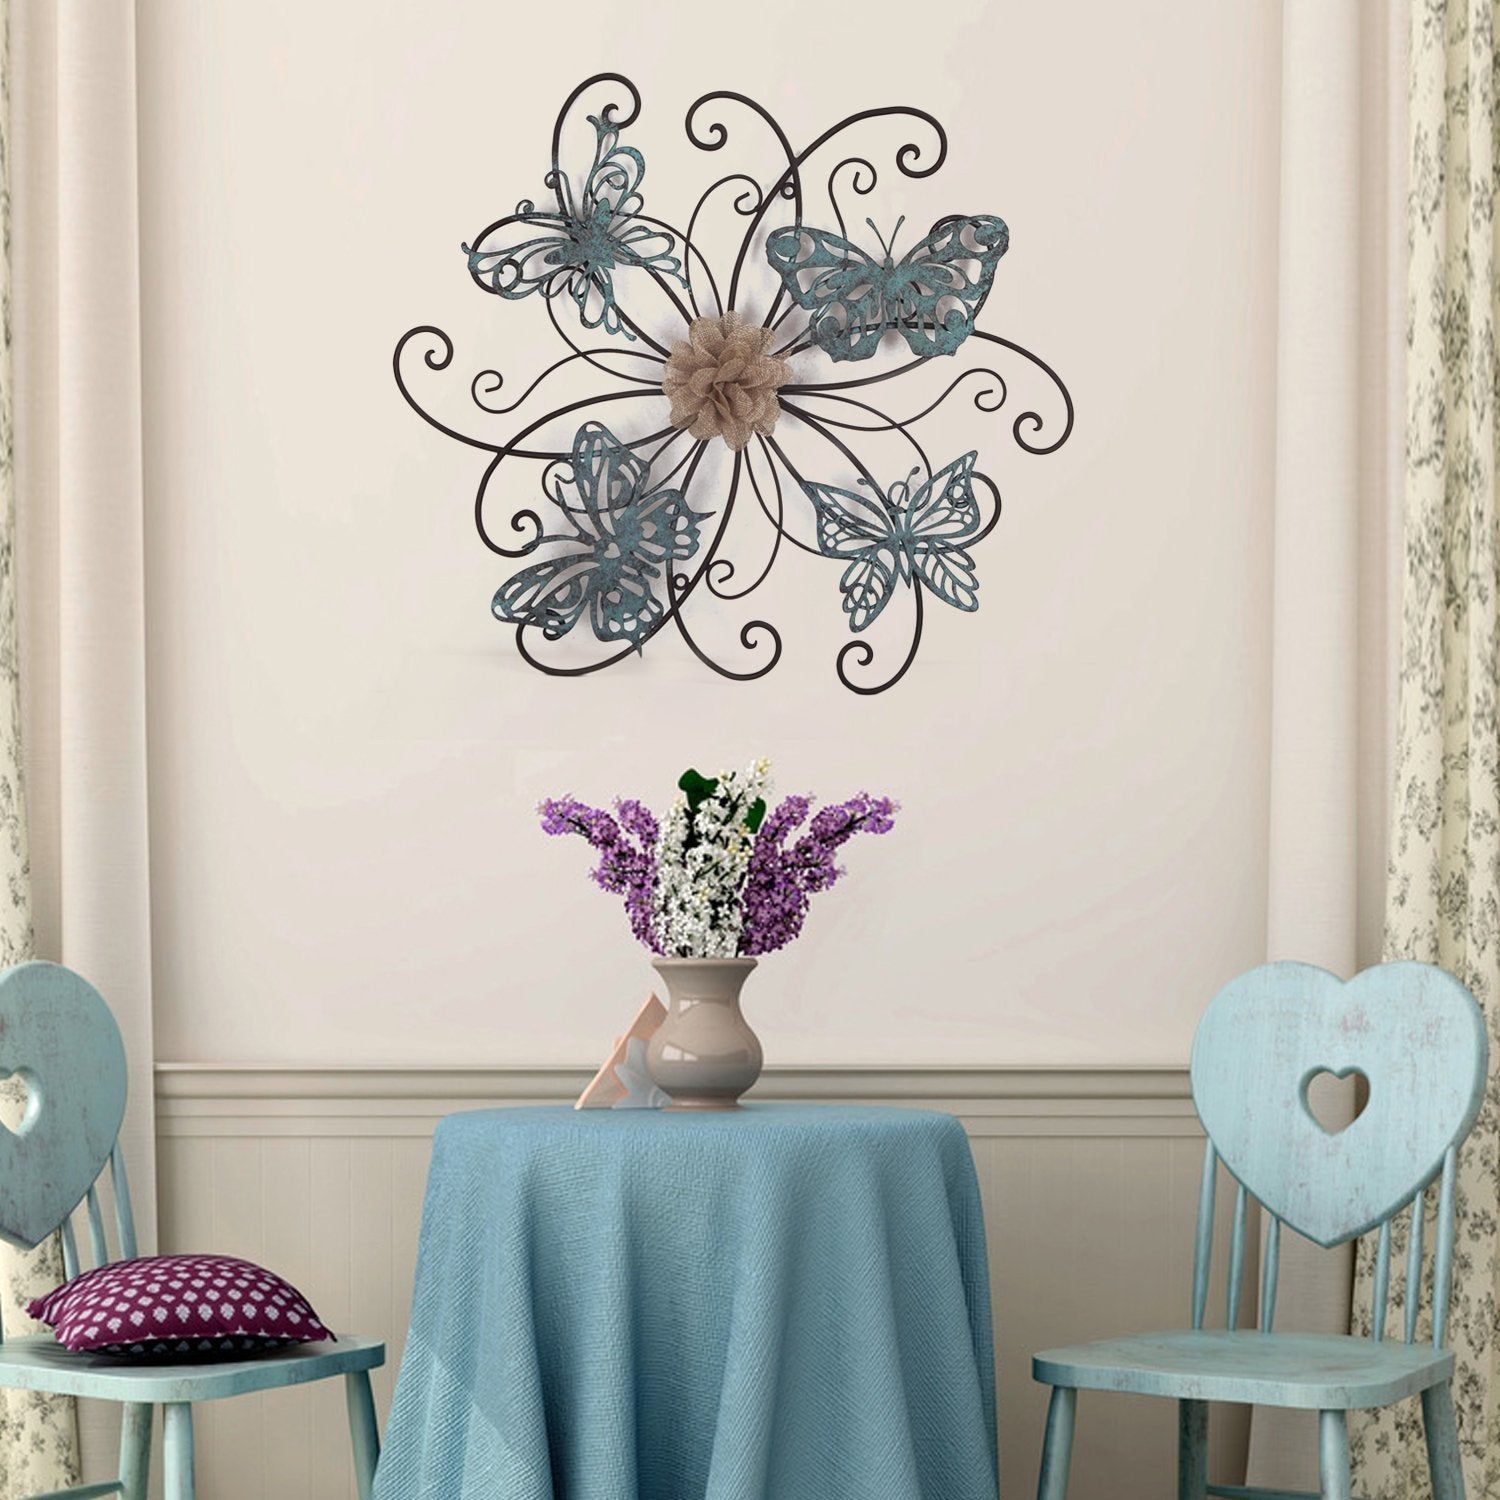 Flower Urban Design Metal Wall Decor Intended For Well Known Shop Adeco Flower And Butterfly Urban Design Metal Wall Decor For (View 14 of 20)